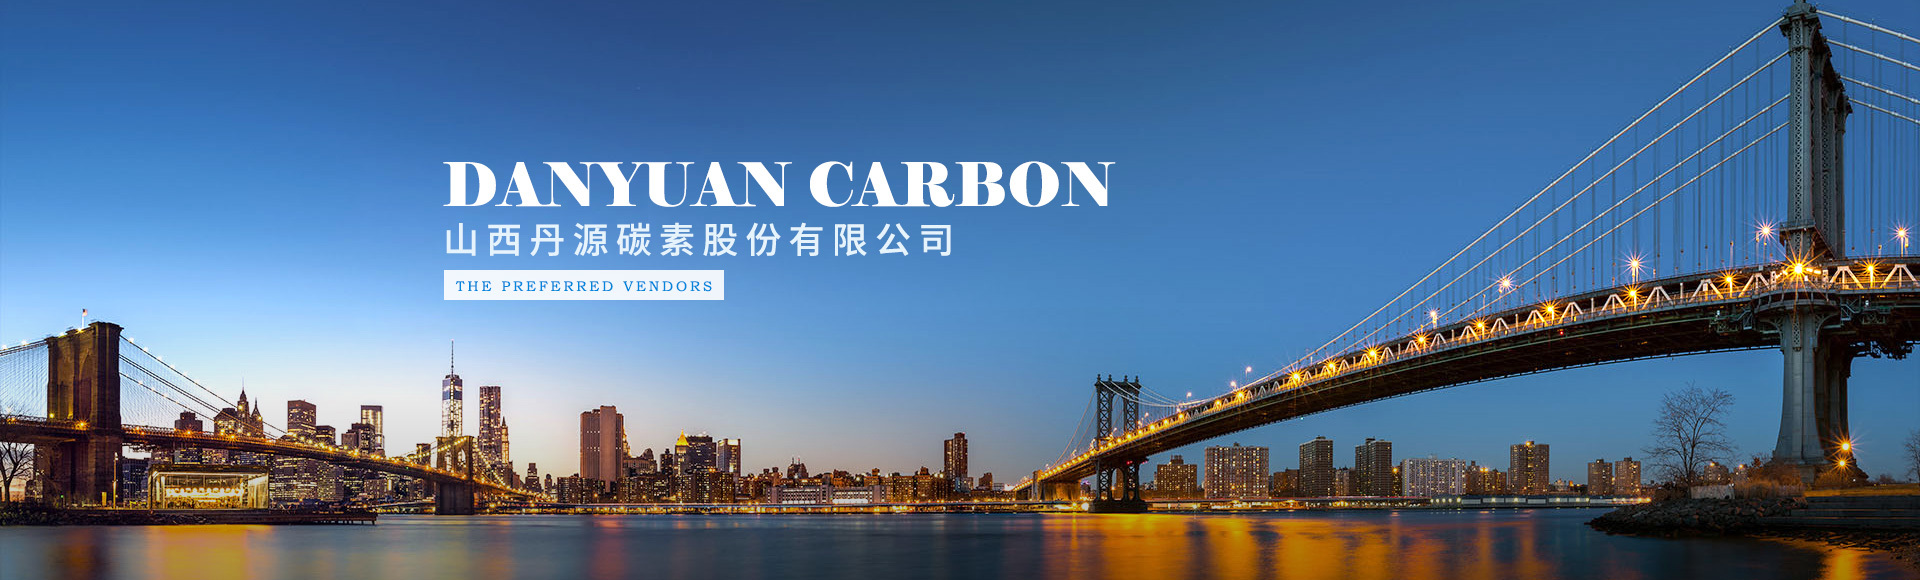 Shanxi Danyuan Carbon Holdings Co., Ltd.